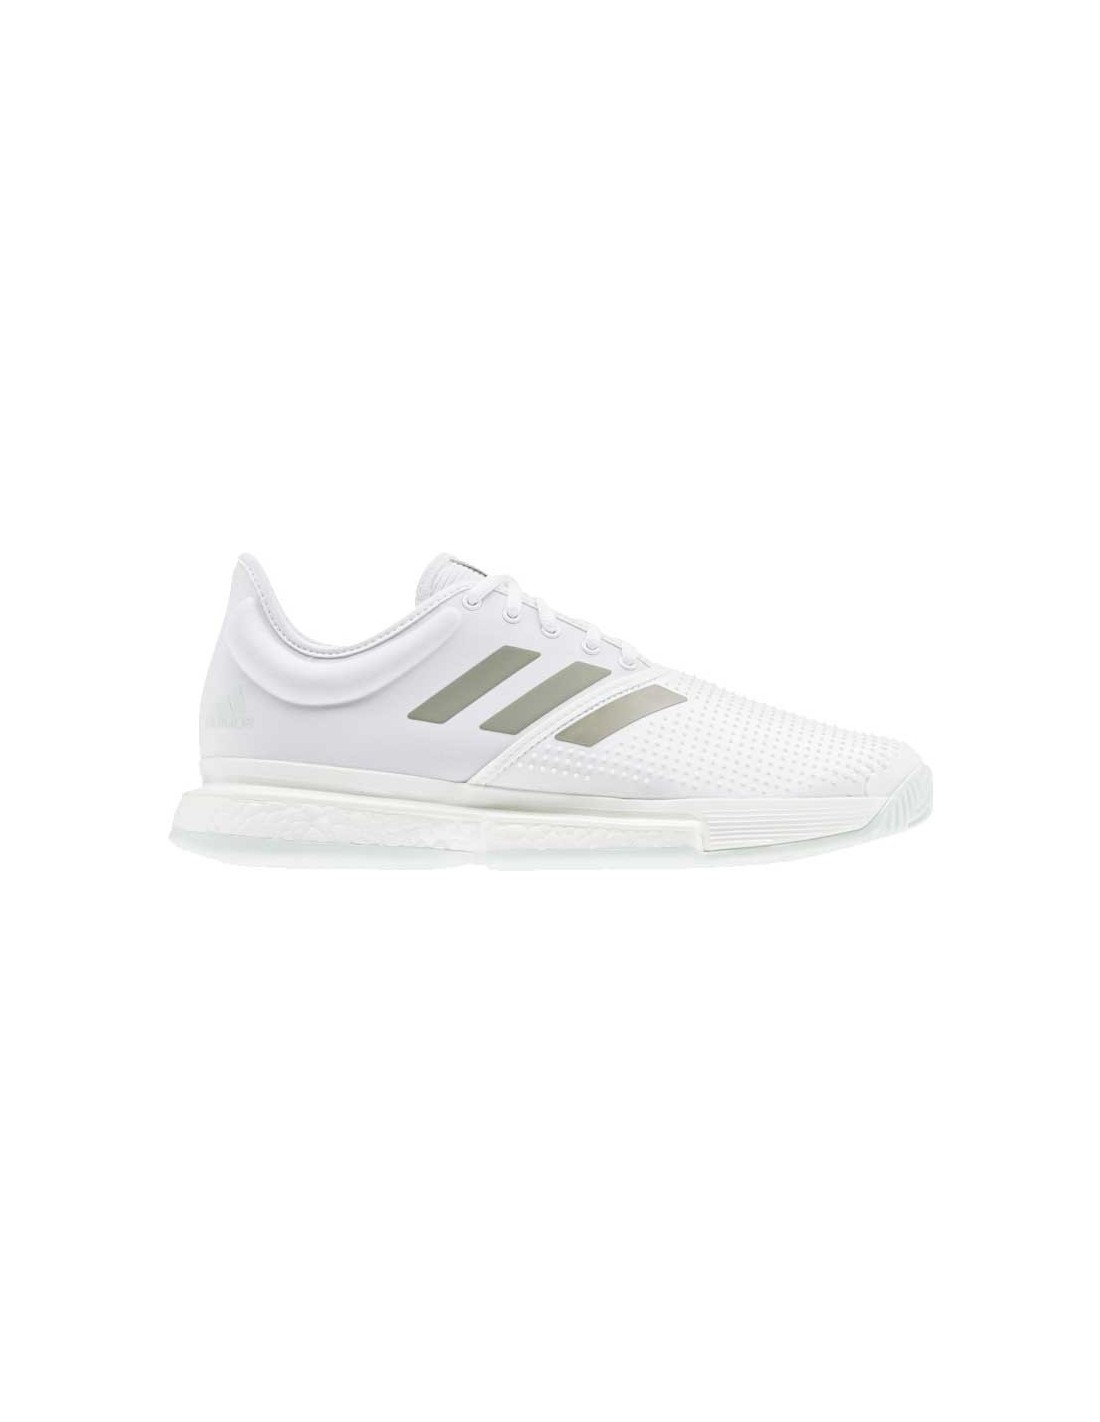 Adidas Solecourt Boost M Clay Shoes | ADIDAS padel shoes | Time2Pad